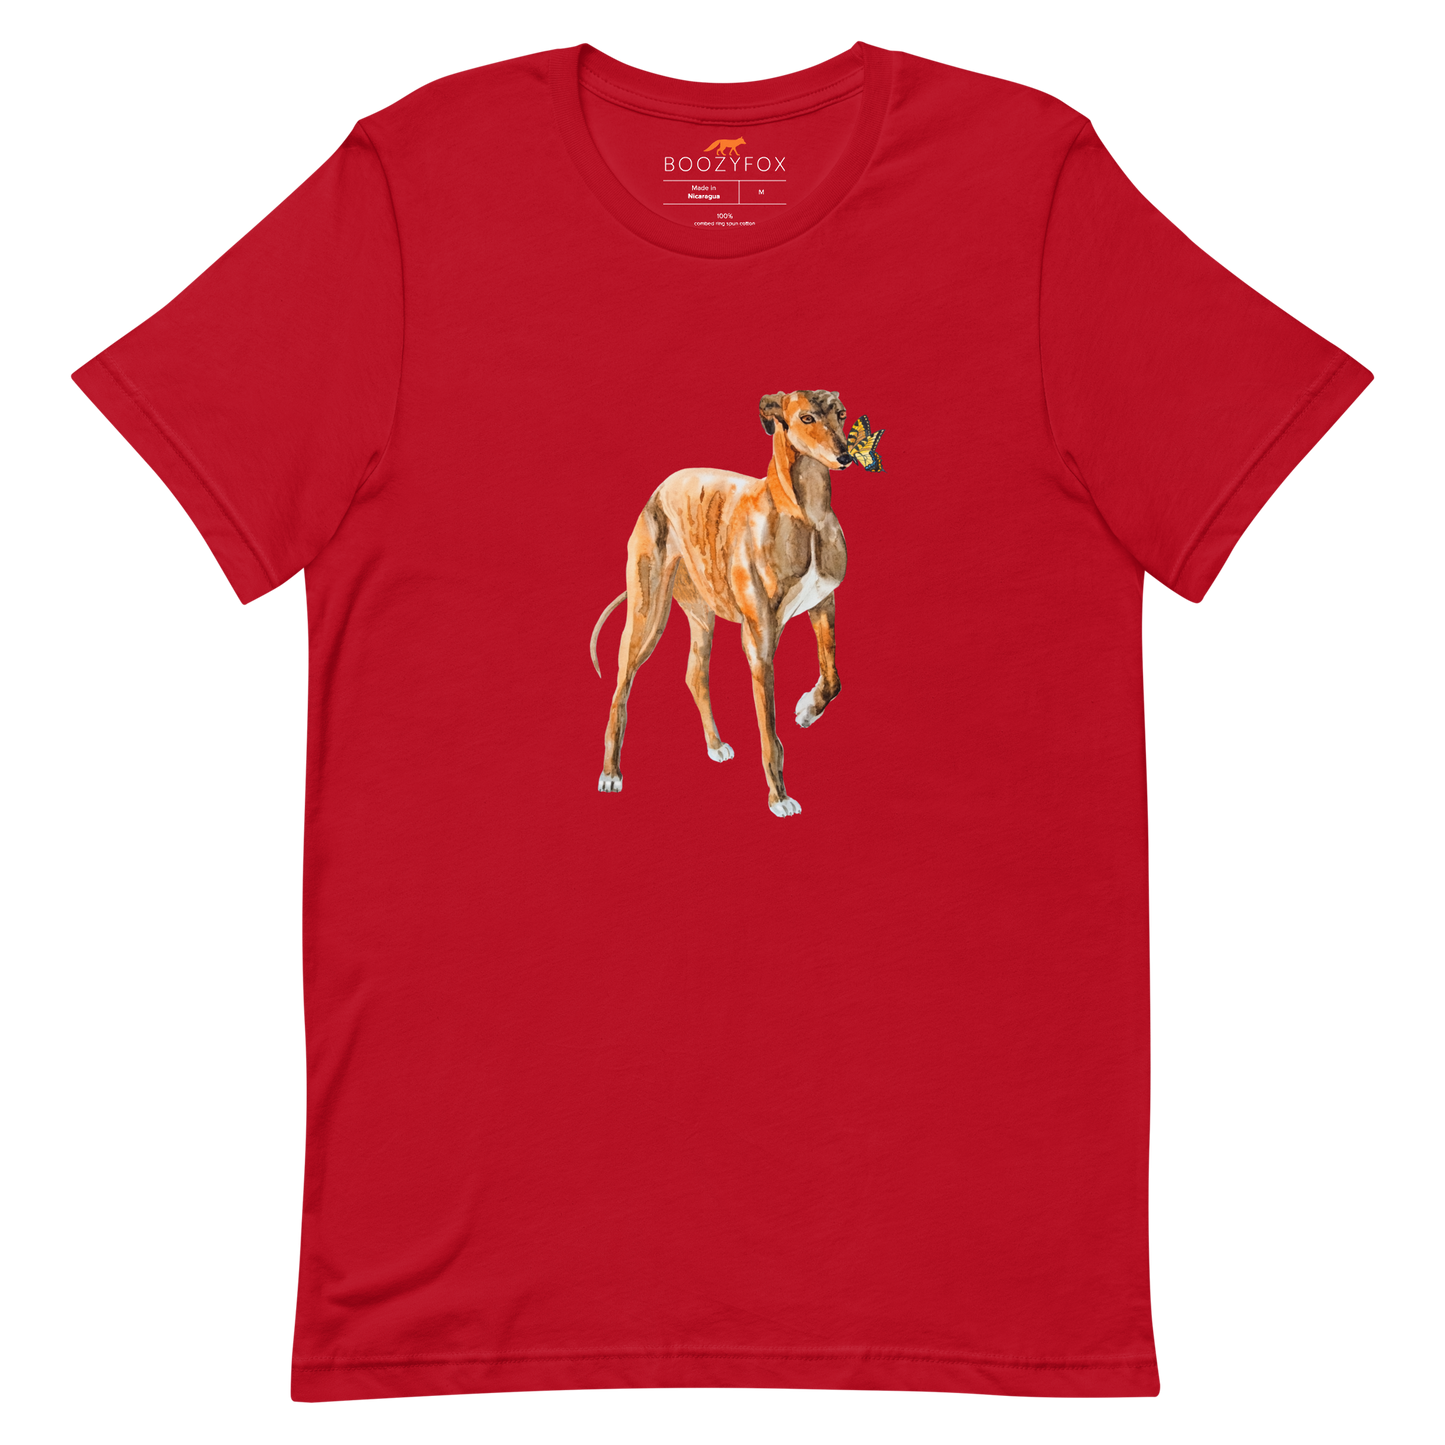 Red Premium Greyhound T-Shirt featuring an adorable Greyhound And Butterfly graphic on the chest - Cute Graphic Greyhound Tees - Boozy Fox